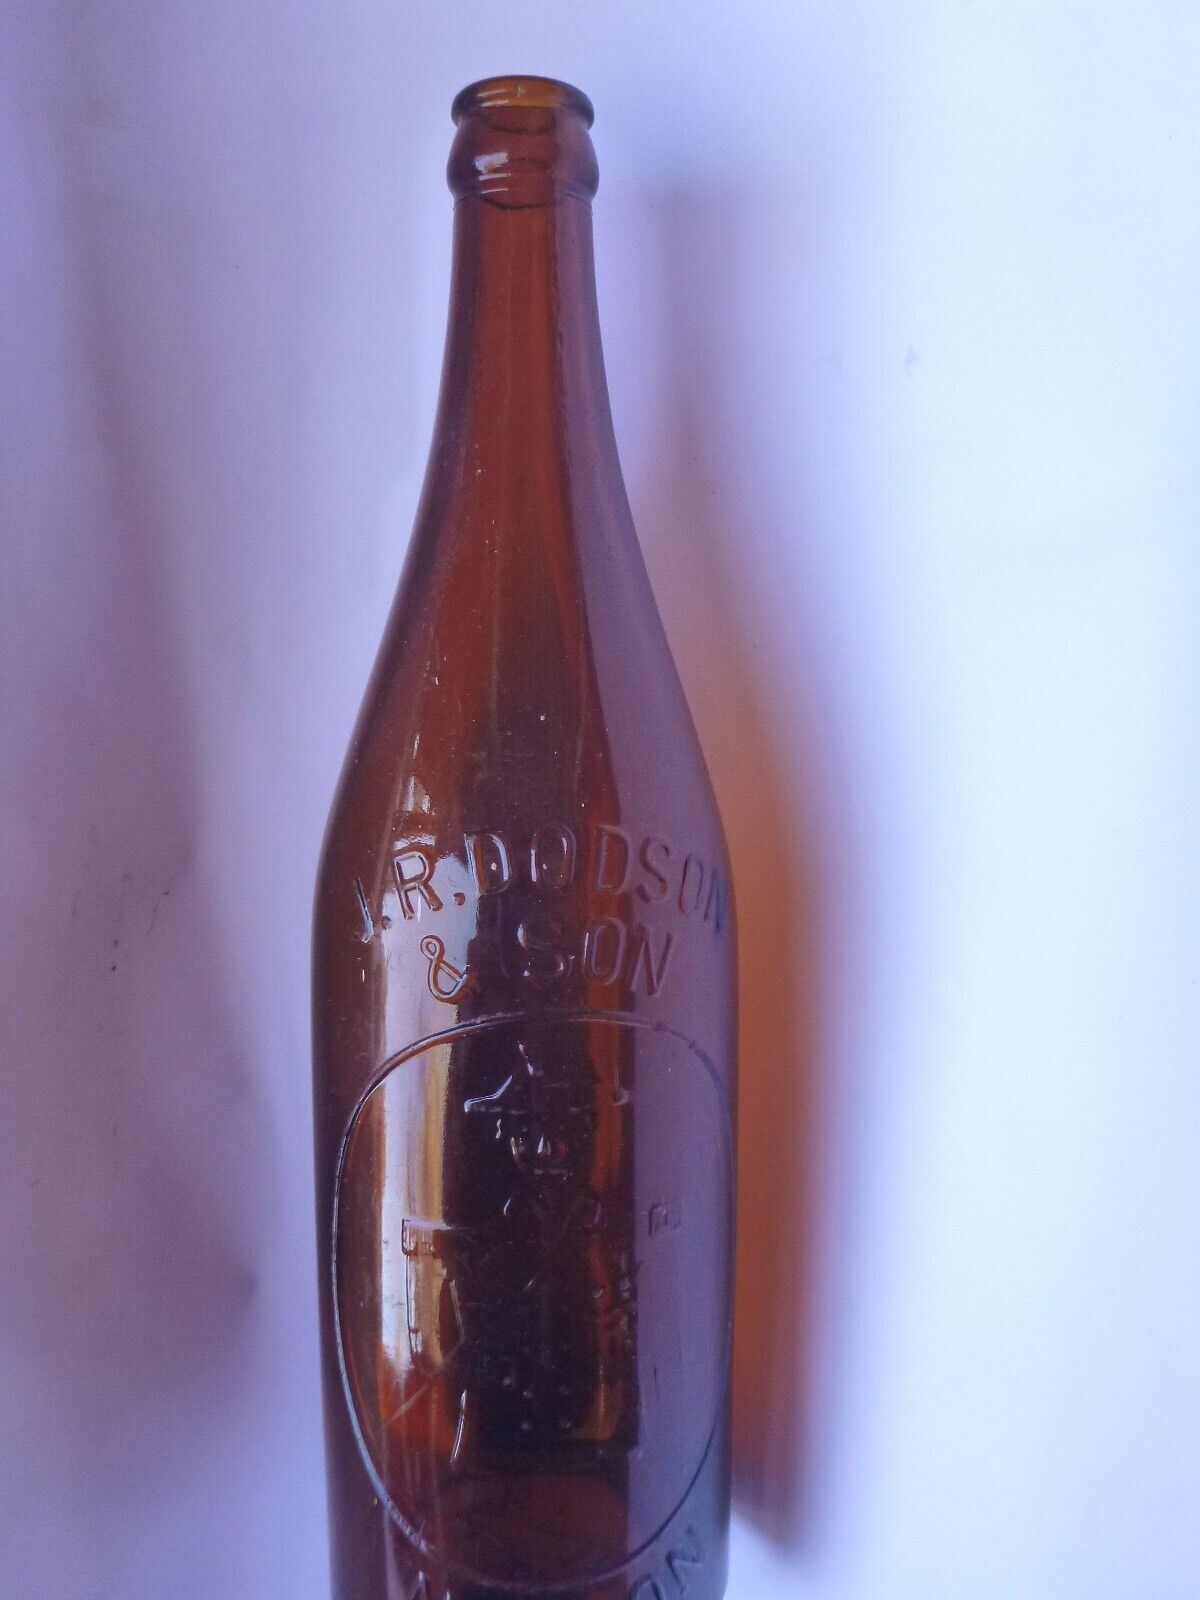 ANTIQUE J.R.DODSON & SON, NZ LORD NELSON TRADE MARK CROWN SEAL BEER BOTTLE